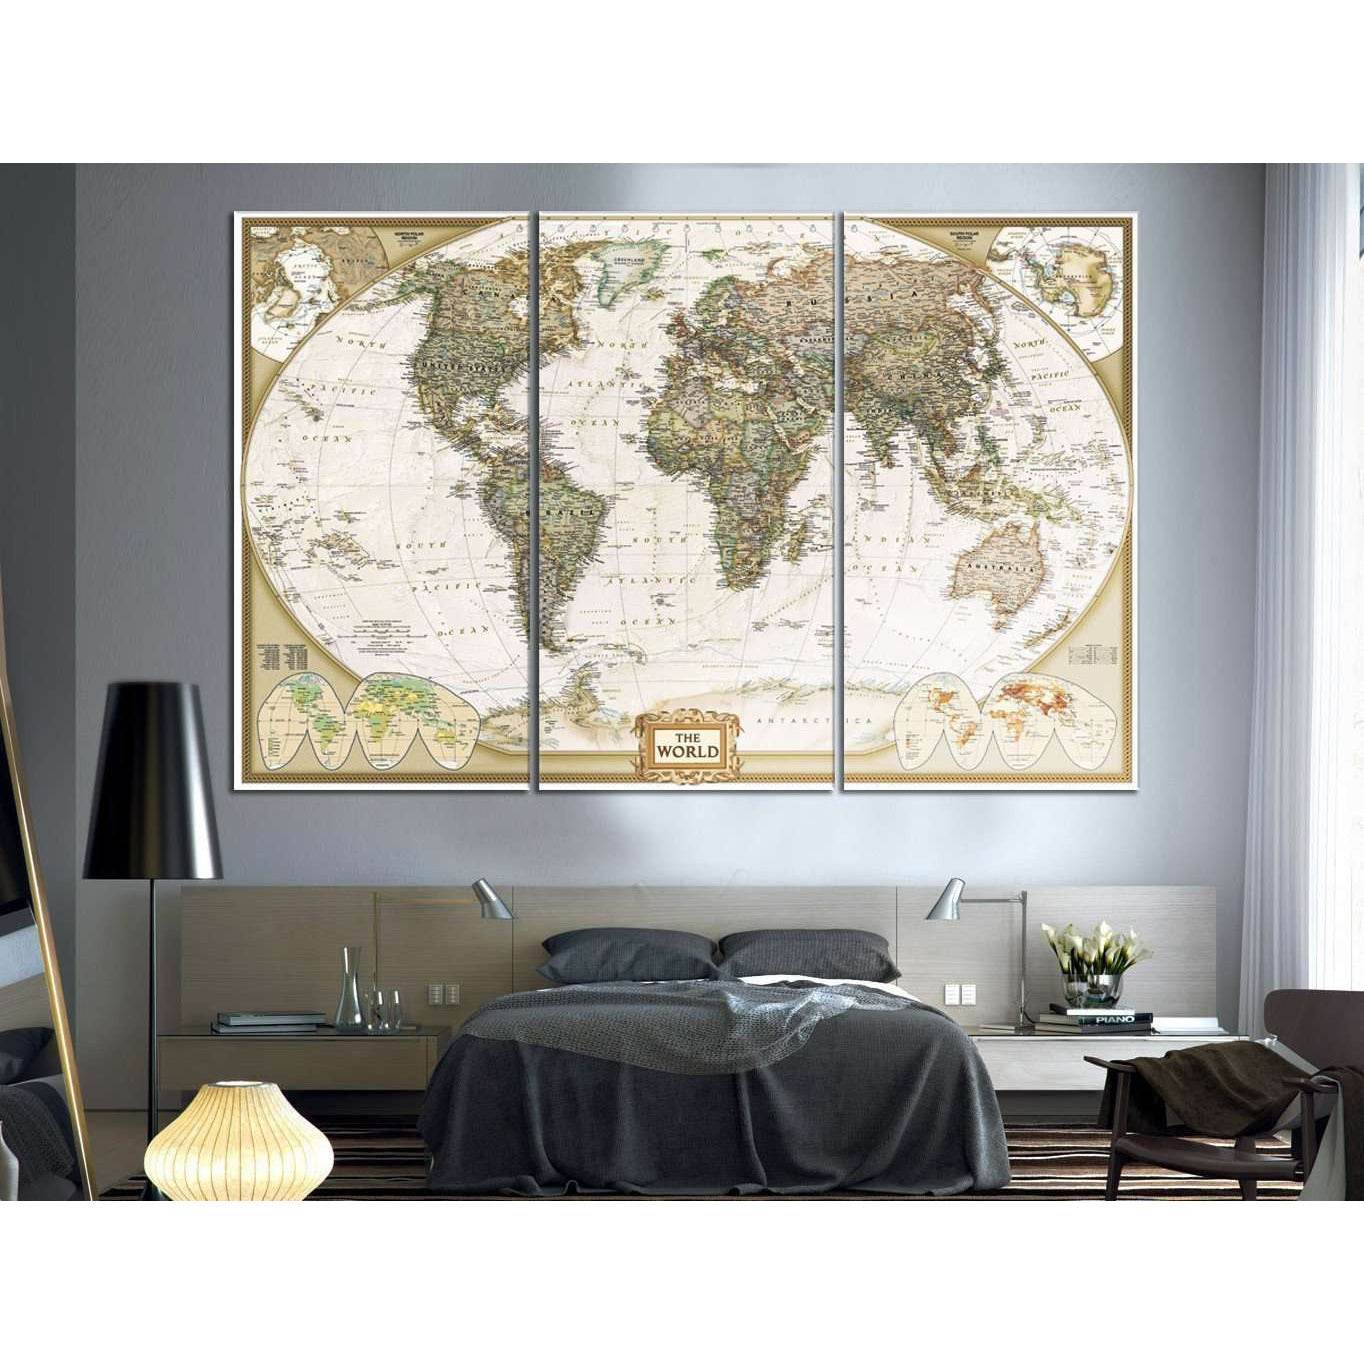 Extremely Detailed World Map PrintDecorate your walls with a stunning Detailed Map Canvas Art Print from the world's largest art gallery. Choose from thousands of World Map artworks with various sizing options. Choose your perfect art print to complete yo